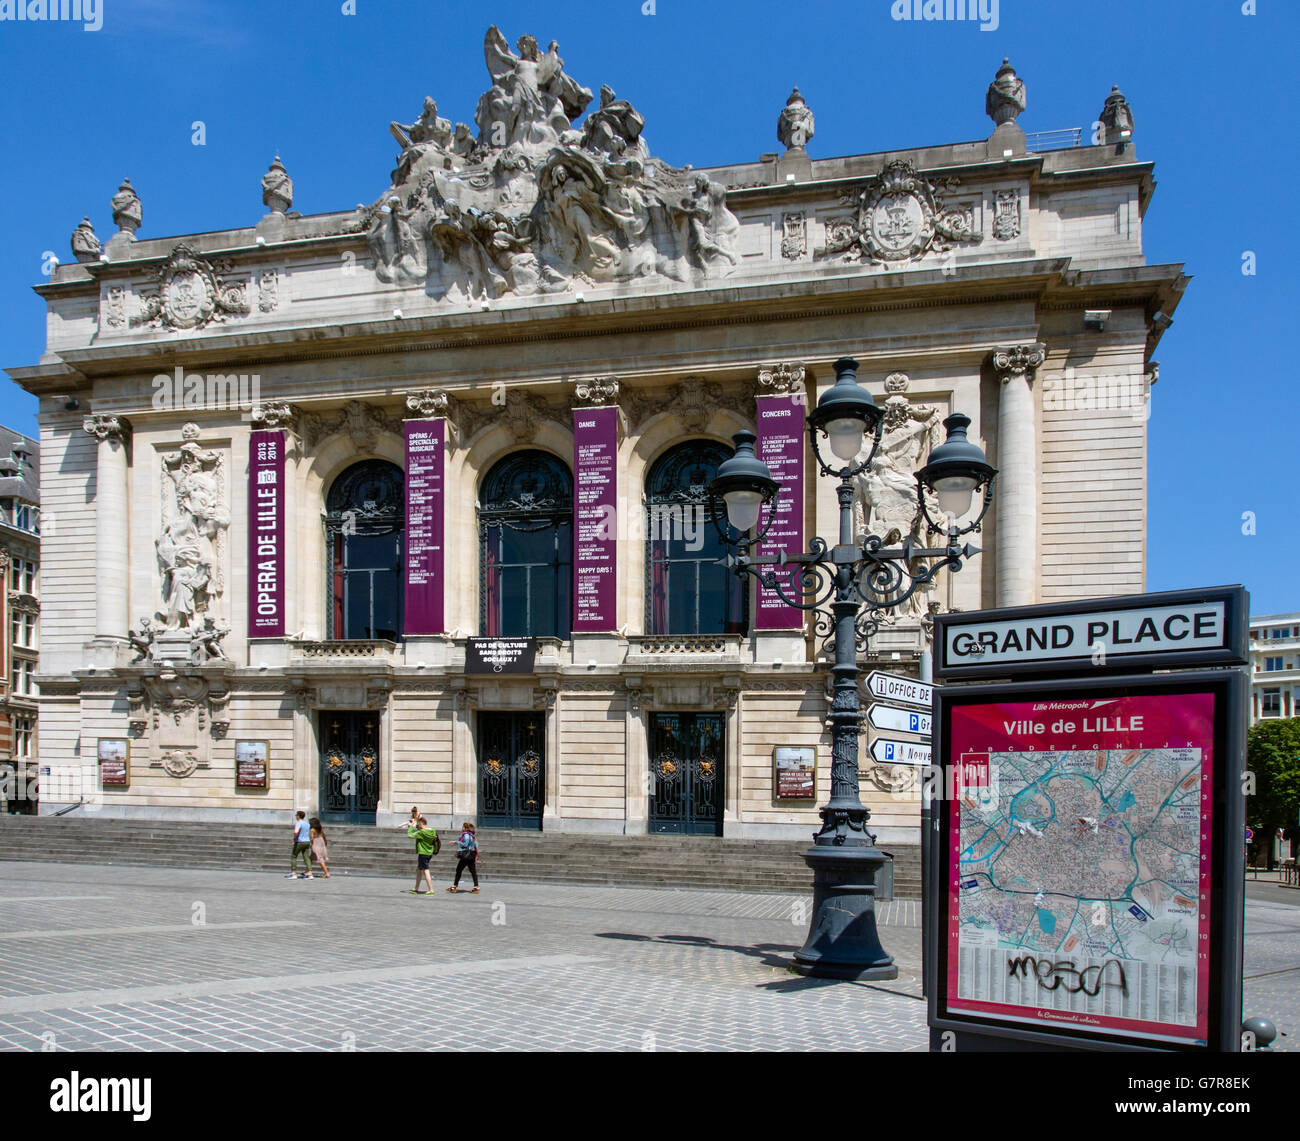 LILLE, FRANCE - JUNE 08, 2014:  Exterior view of the Opera House (Opera de Lille) with signs Stock Photo